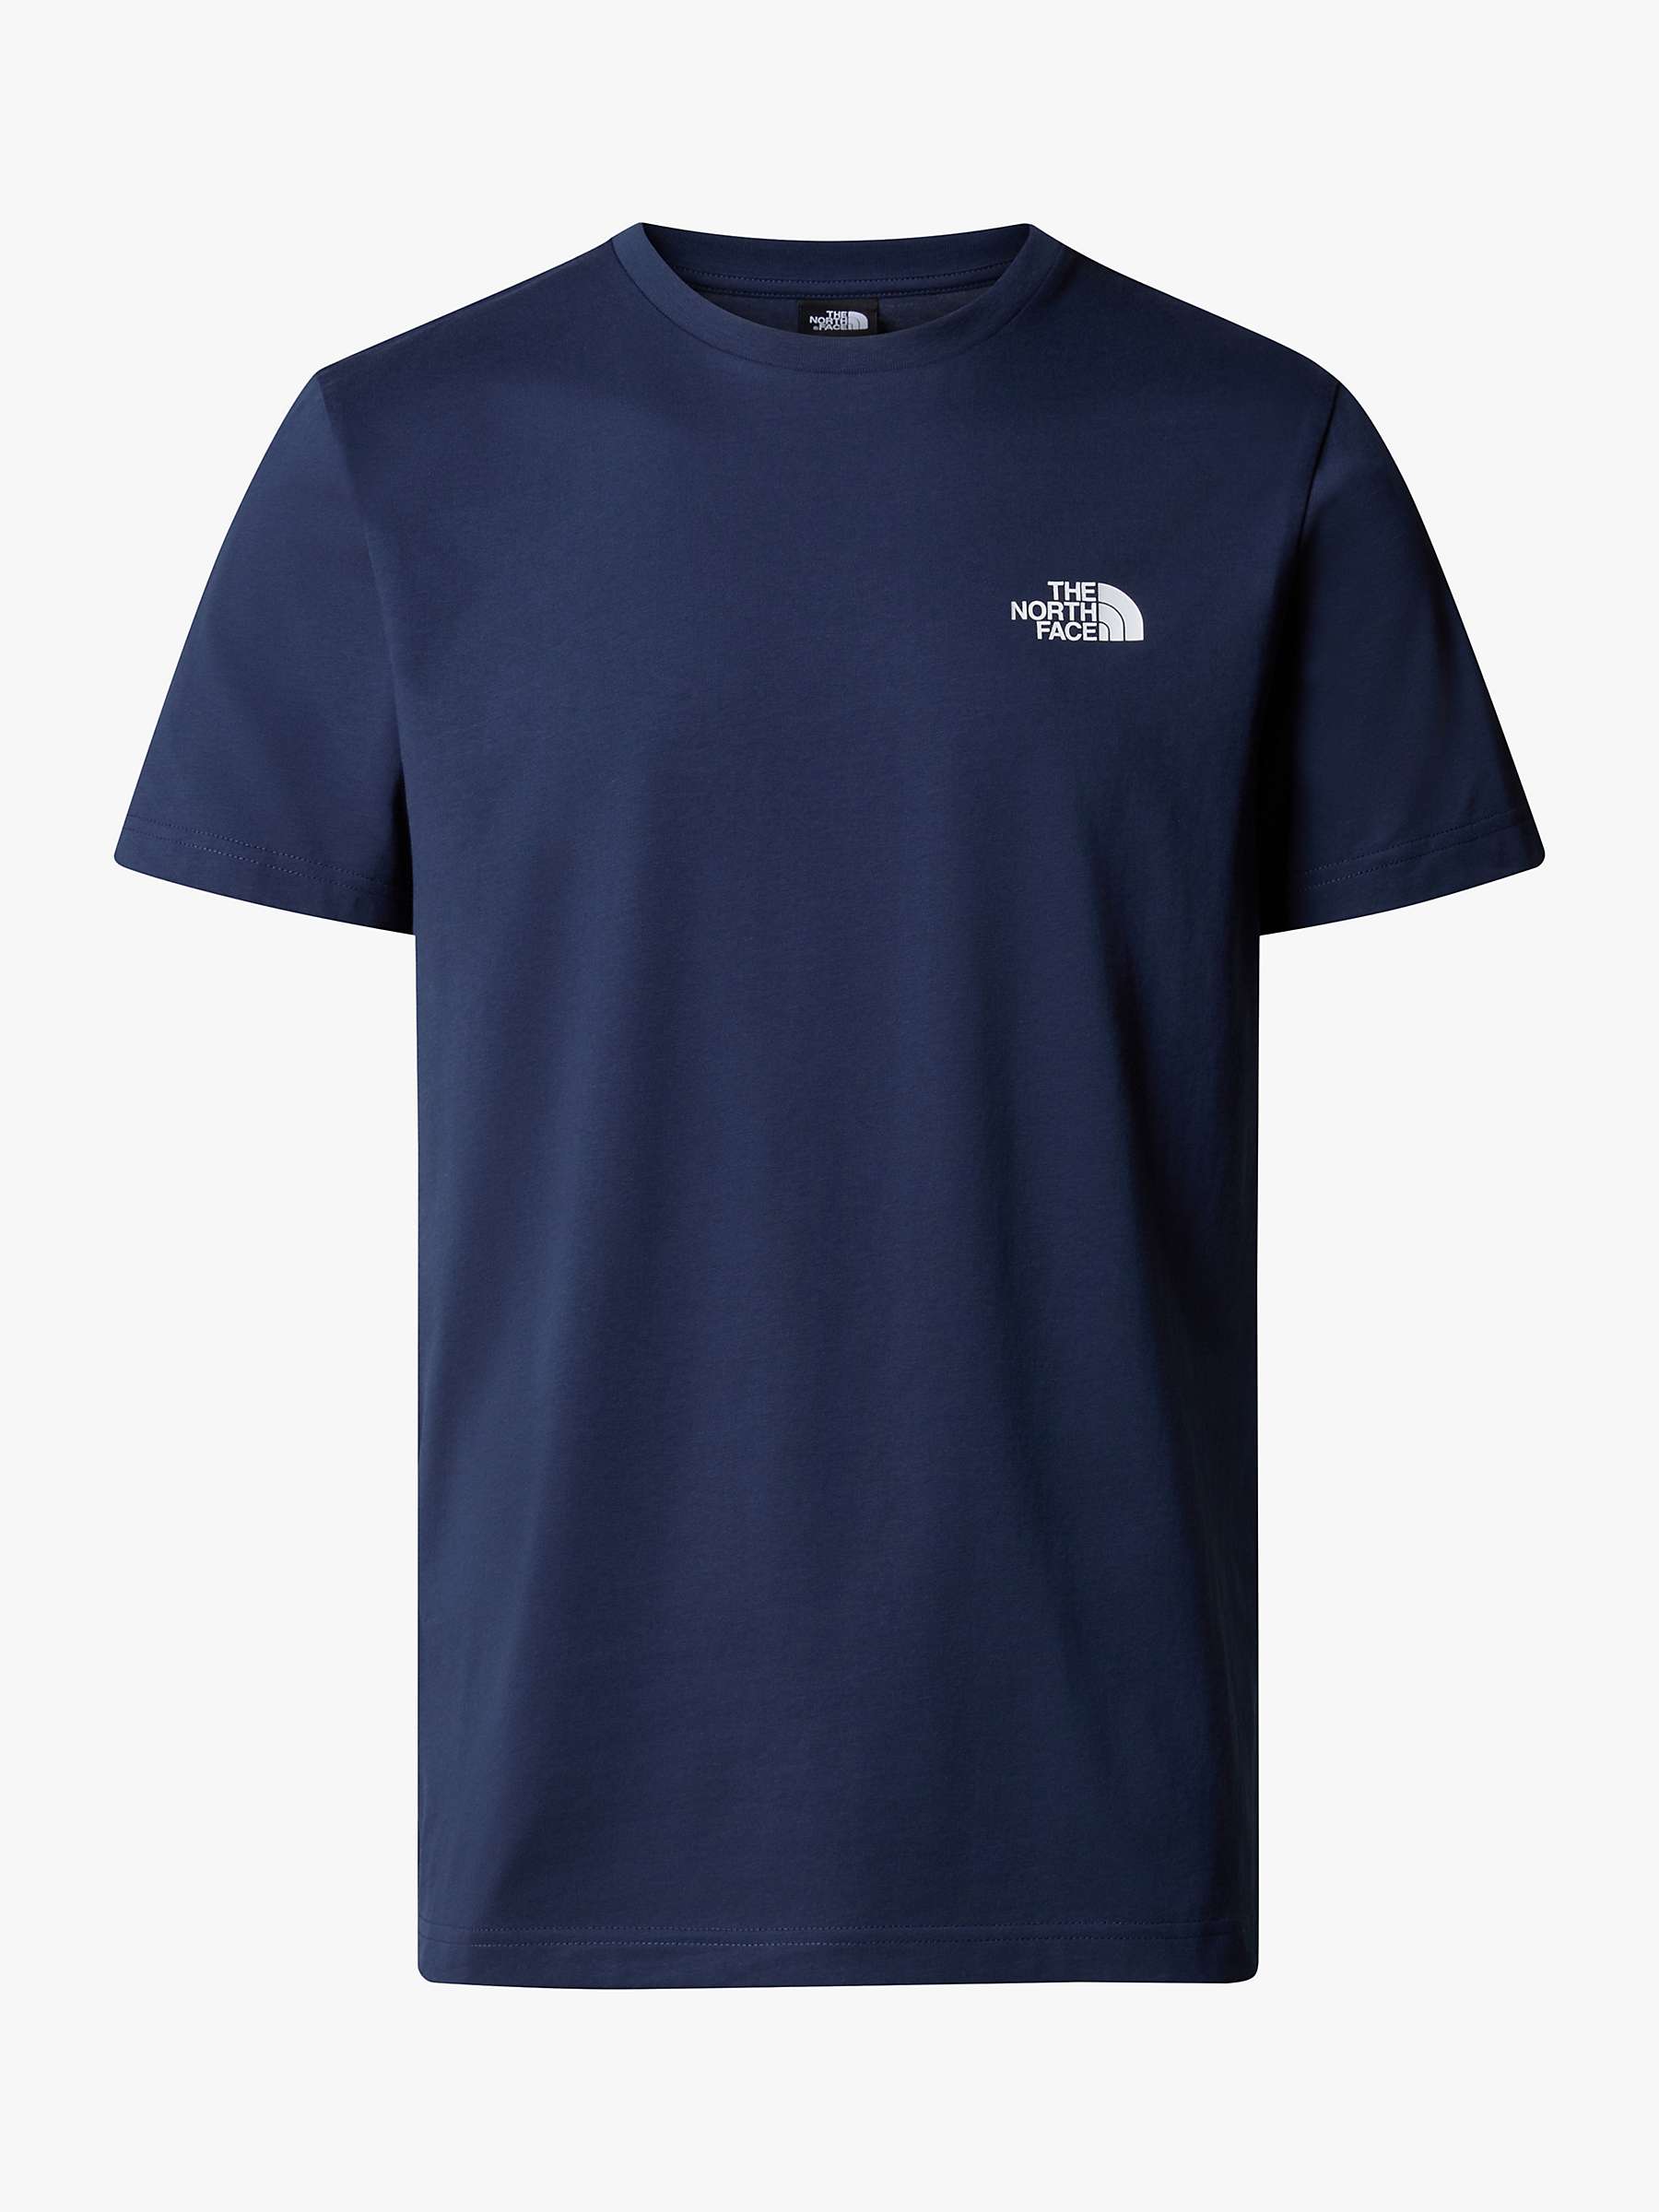 Buy The North Face Short Sleeve Dome T-Shirt, Navy Online at johnlewis.com